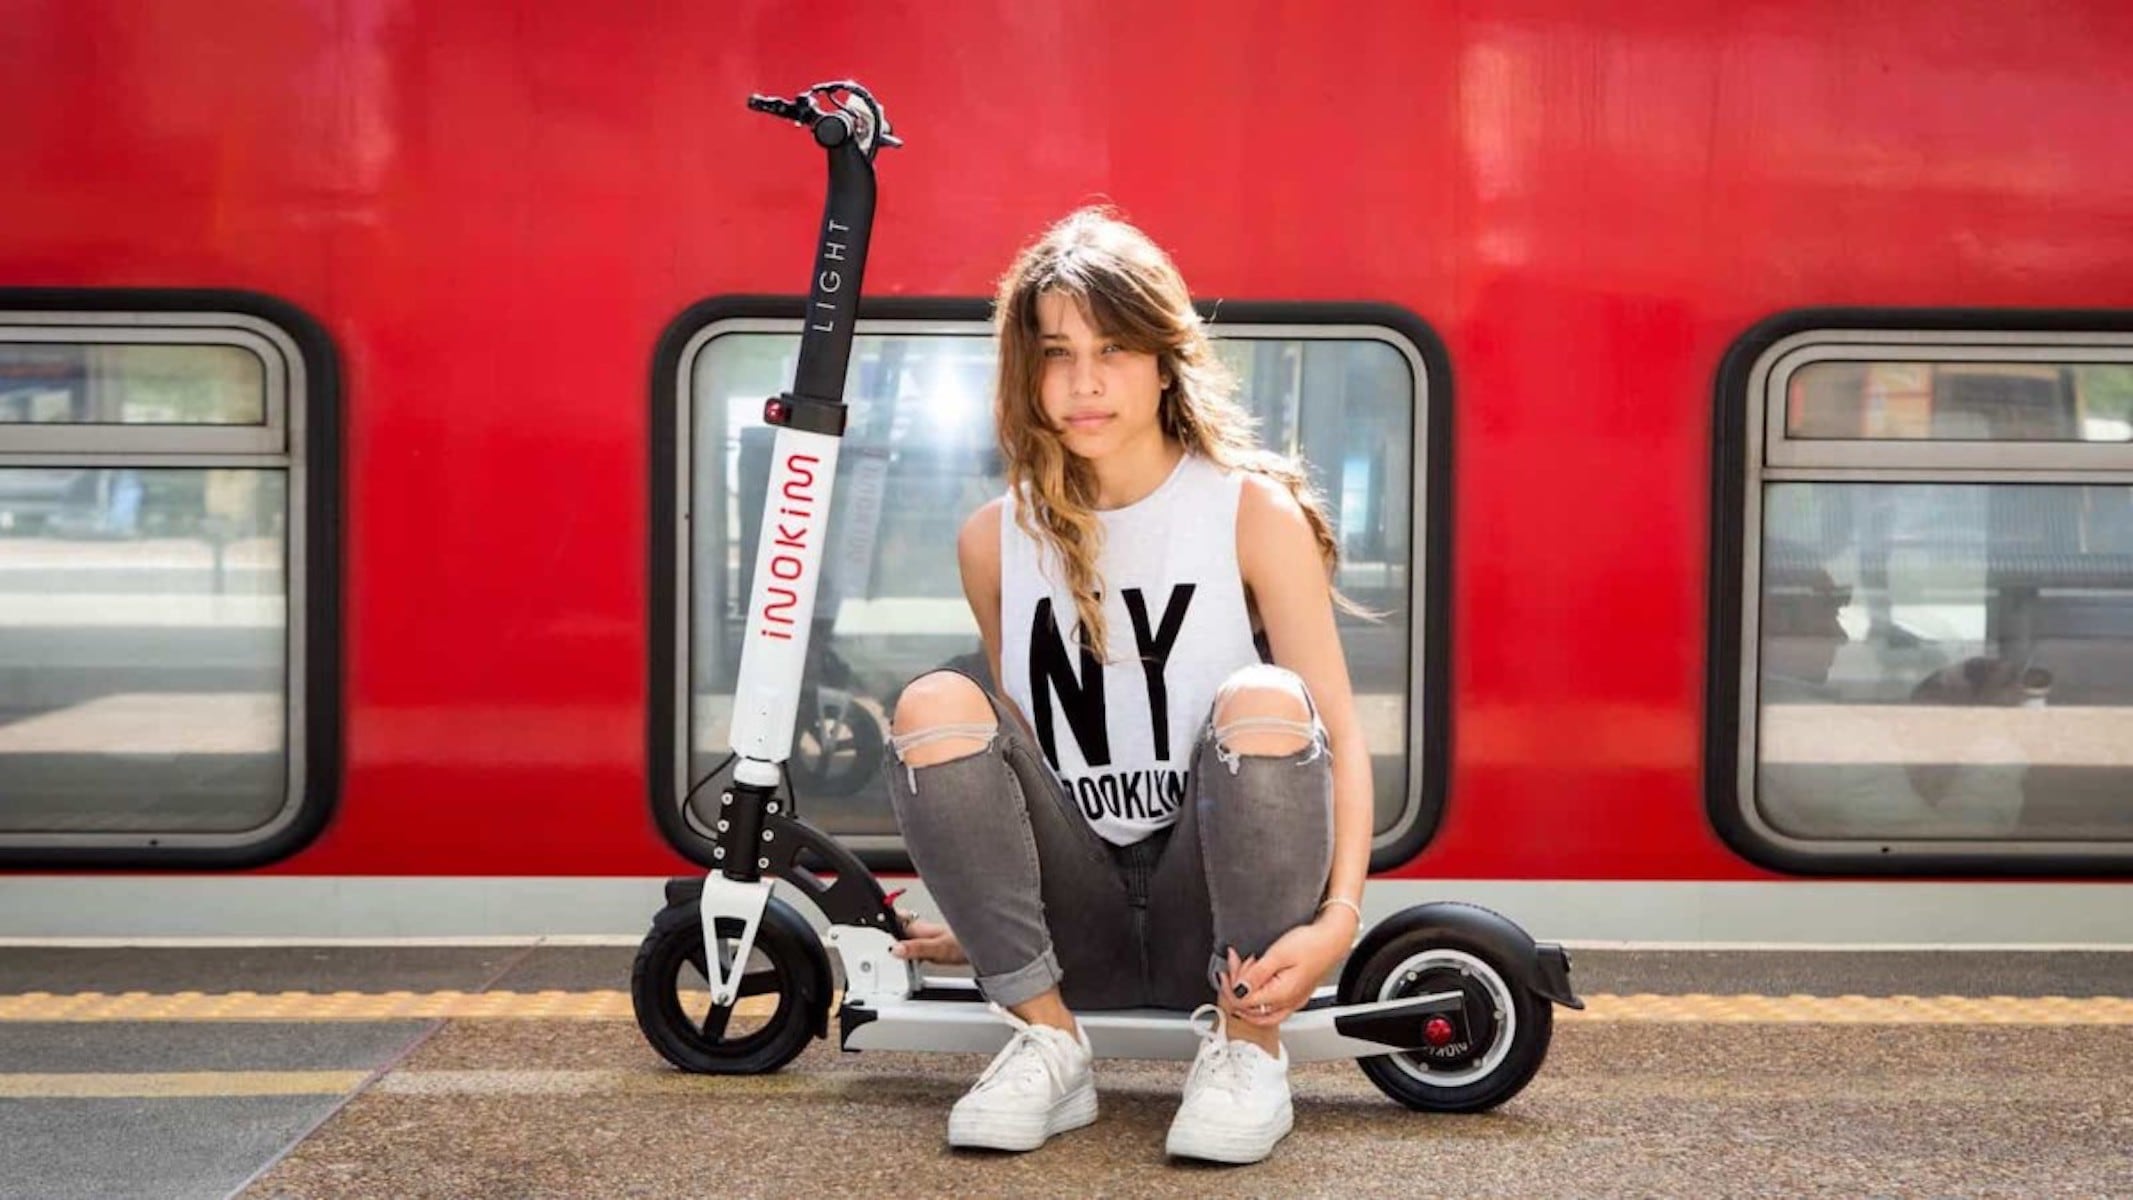 This Electric Scooter Is A Great Alternative To Driving